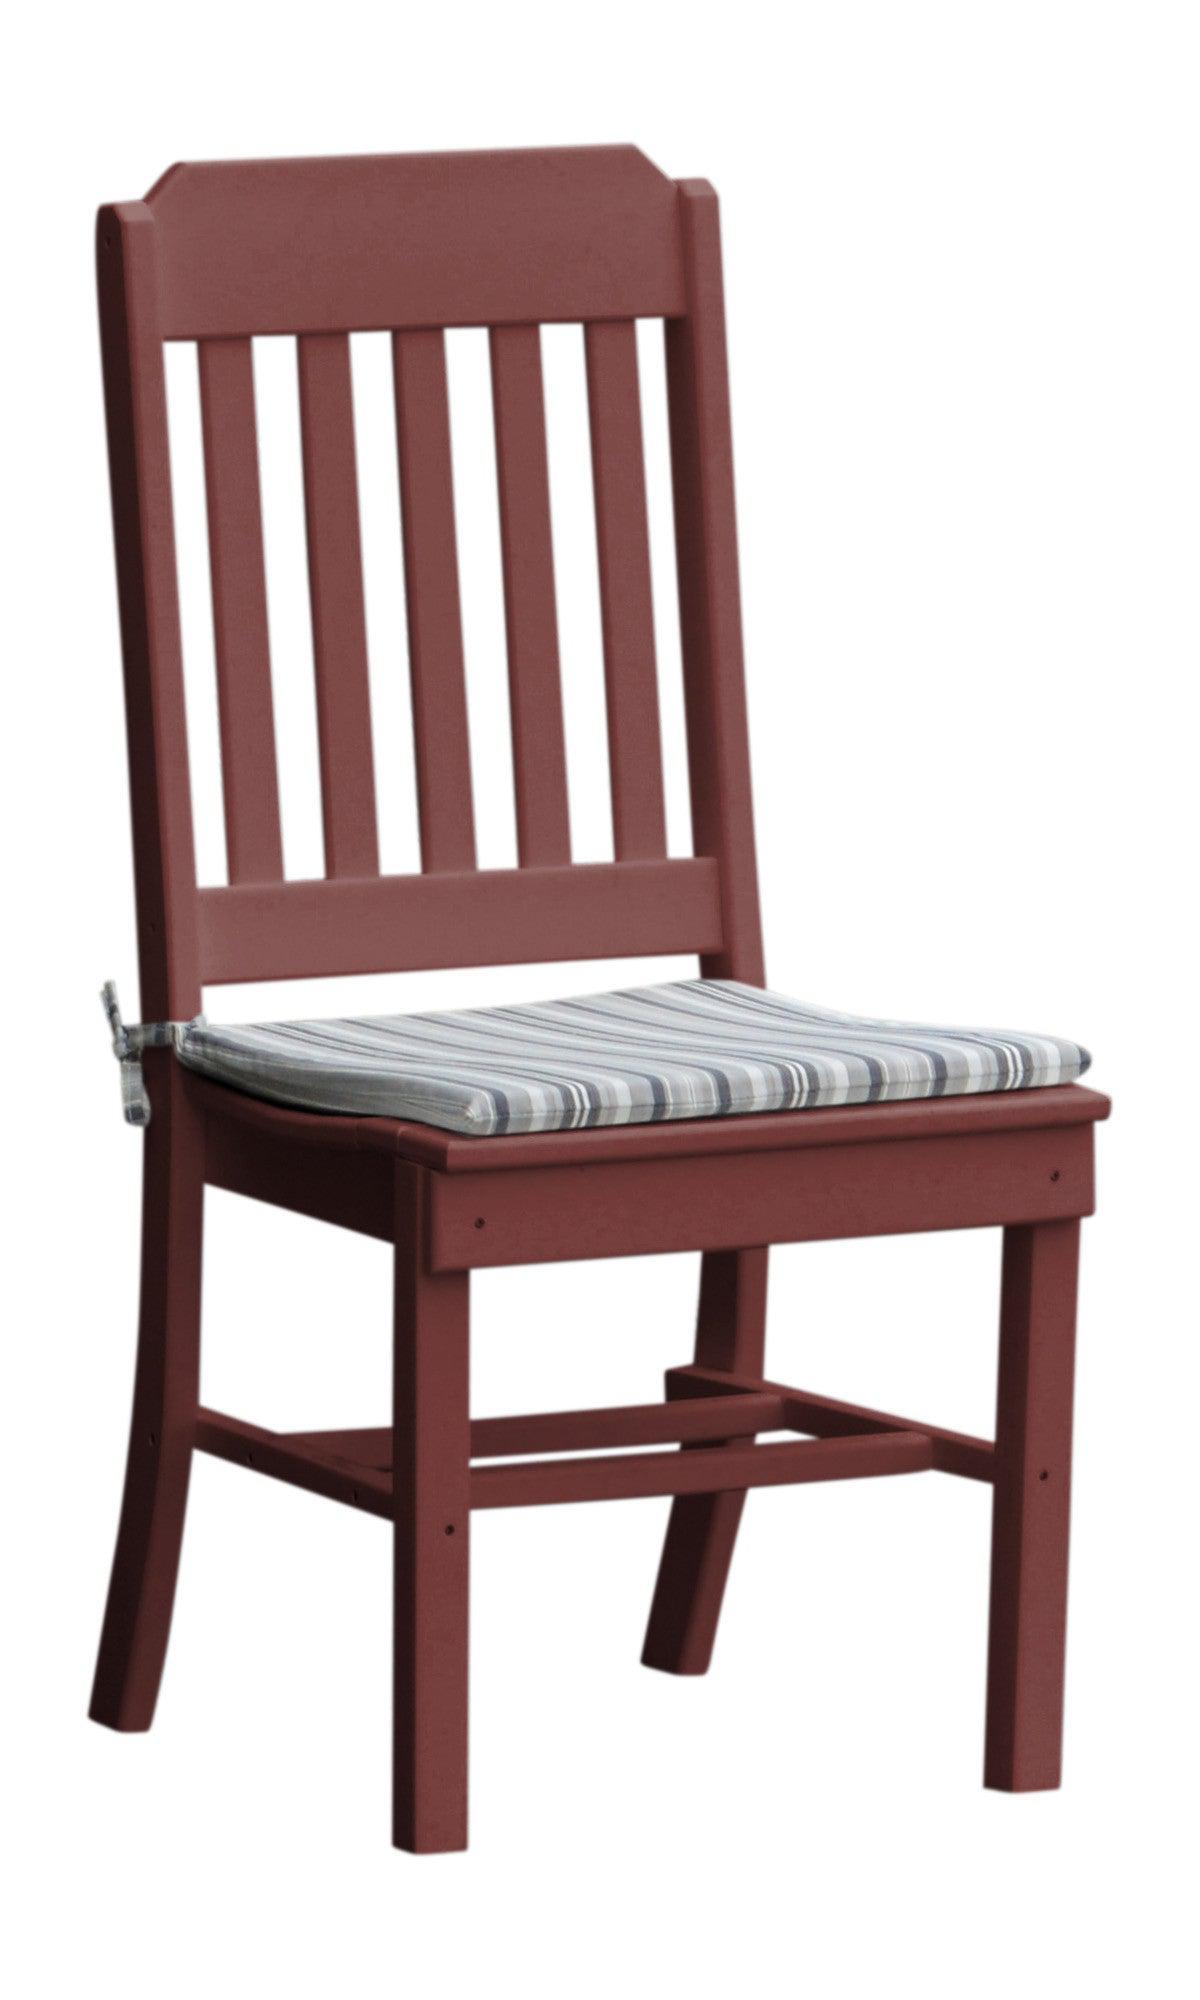 A&L Furniture Company Recycled Plastic Traditional Dining Chair - Cherrywood